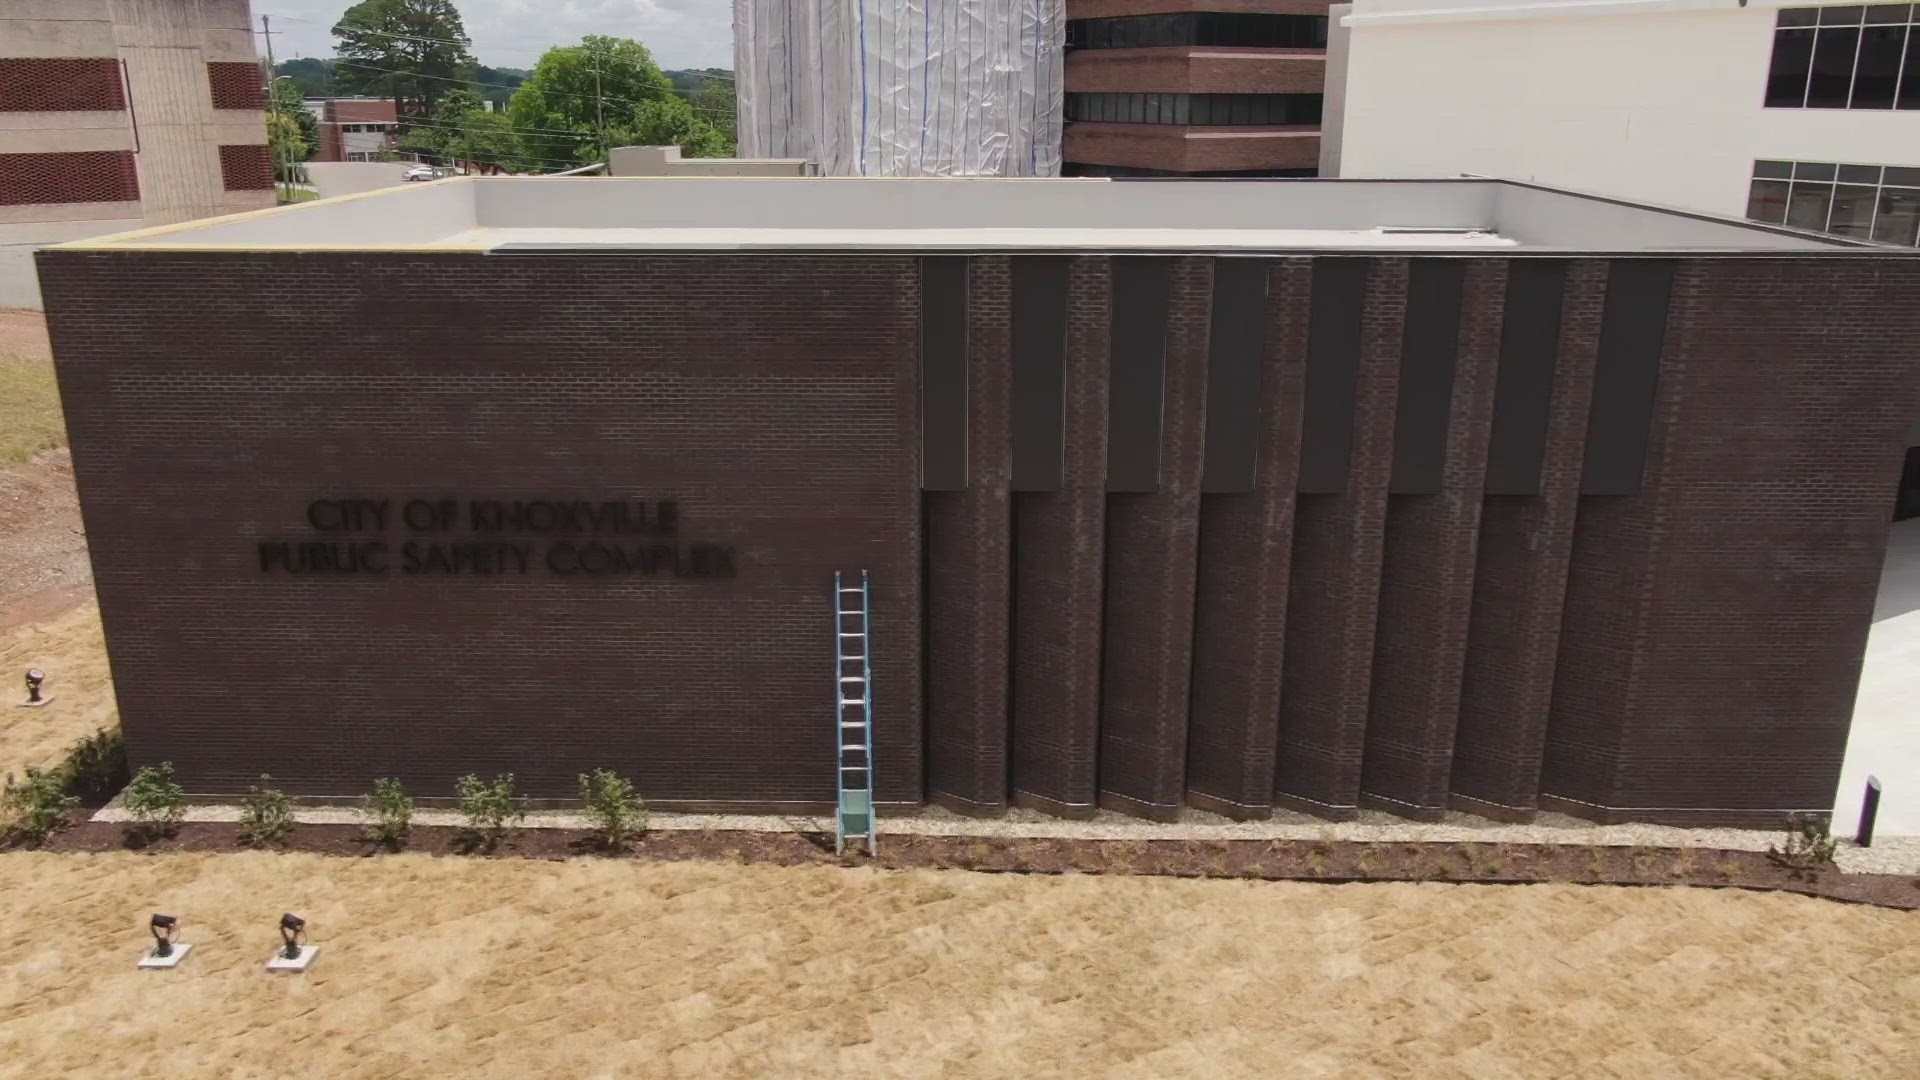 Municipal Court held its first session on Monday. KPD said the new complex is where the public can access records, teleserve and hit-and-run.